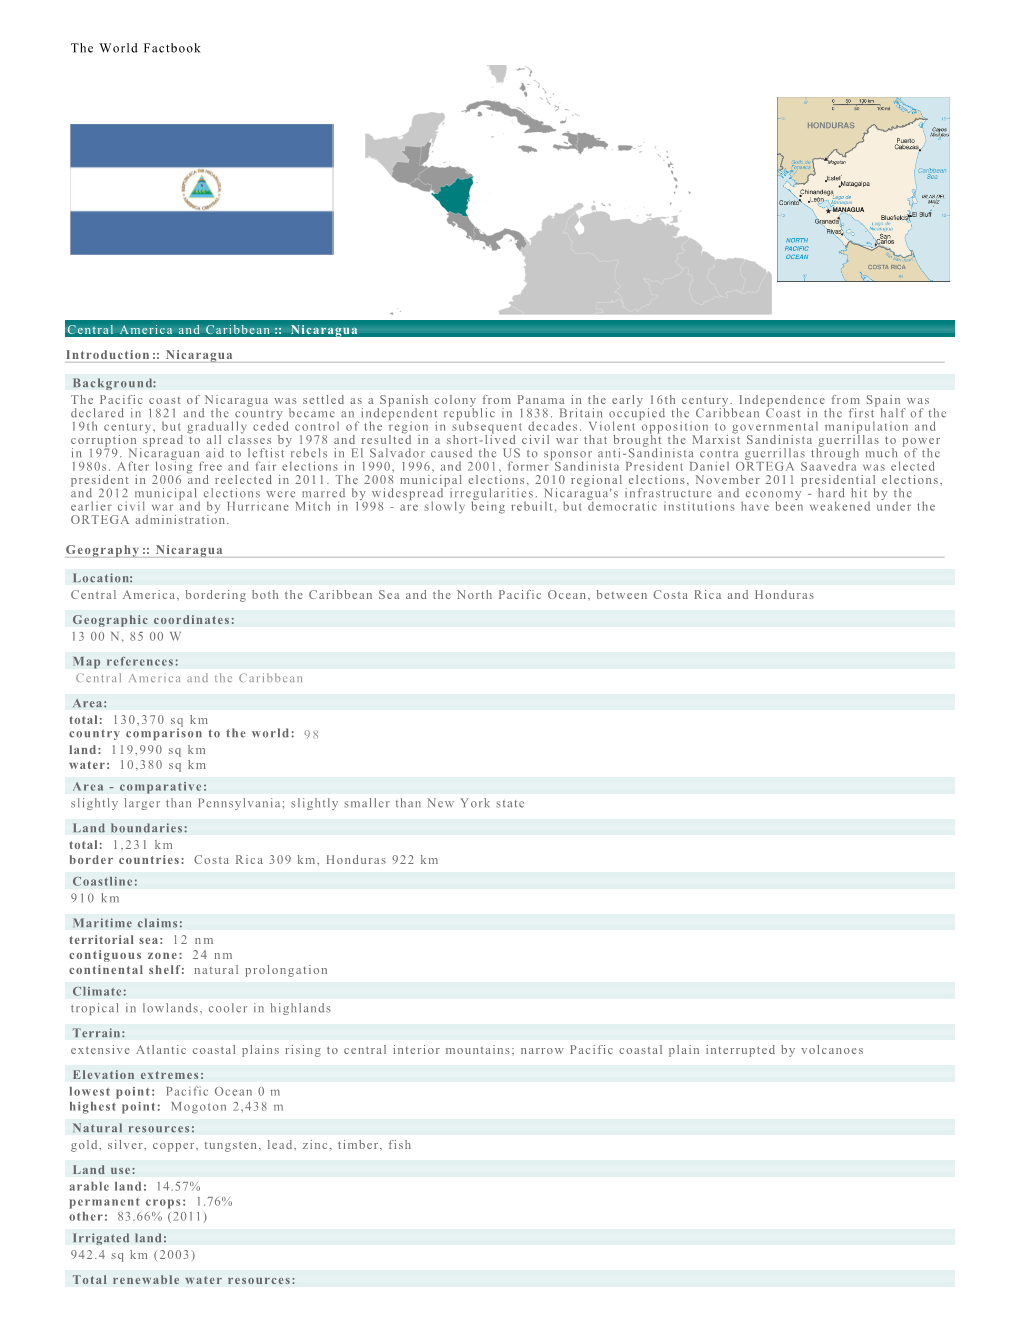 The World Factbook Central America and Caribbean :: Nicaragua